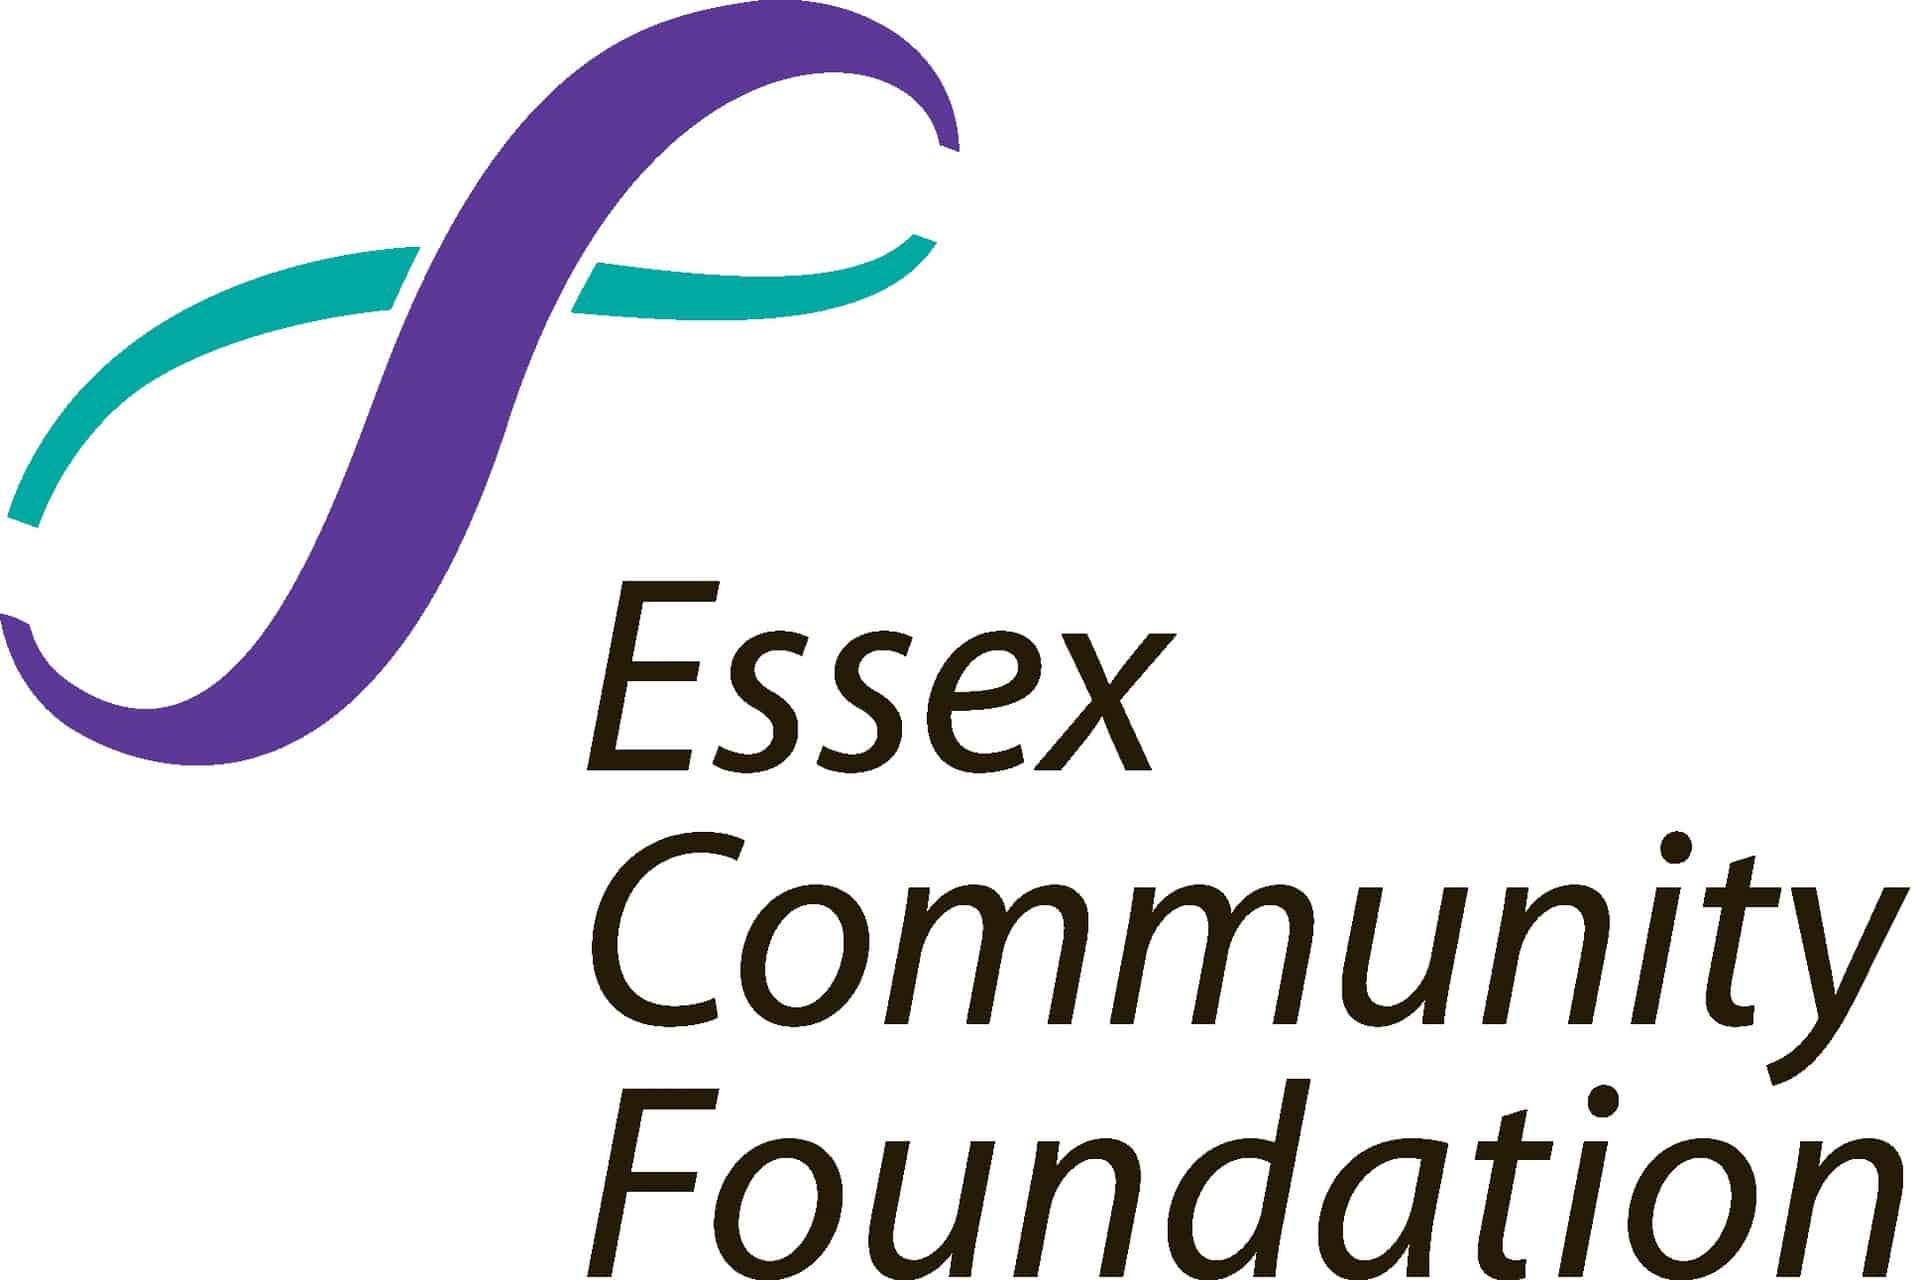 Featured image for “ESSEX COMMUNITY FOUNDATION”